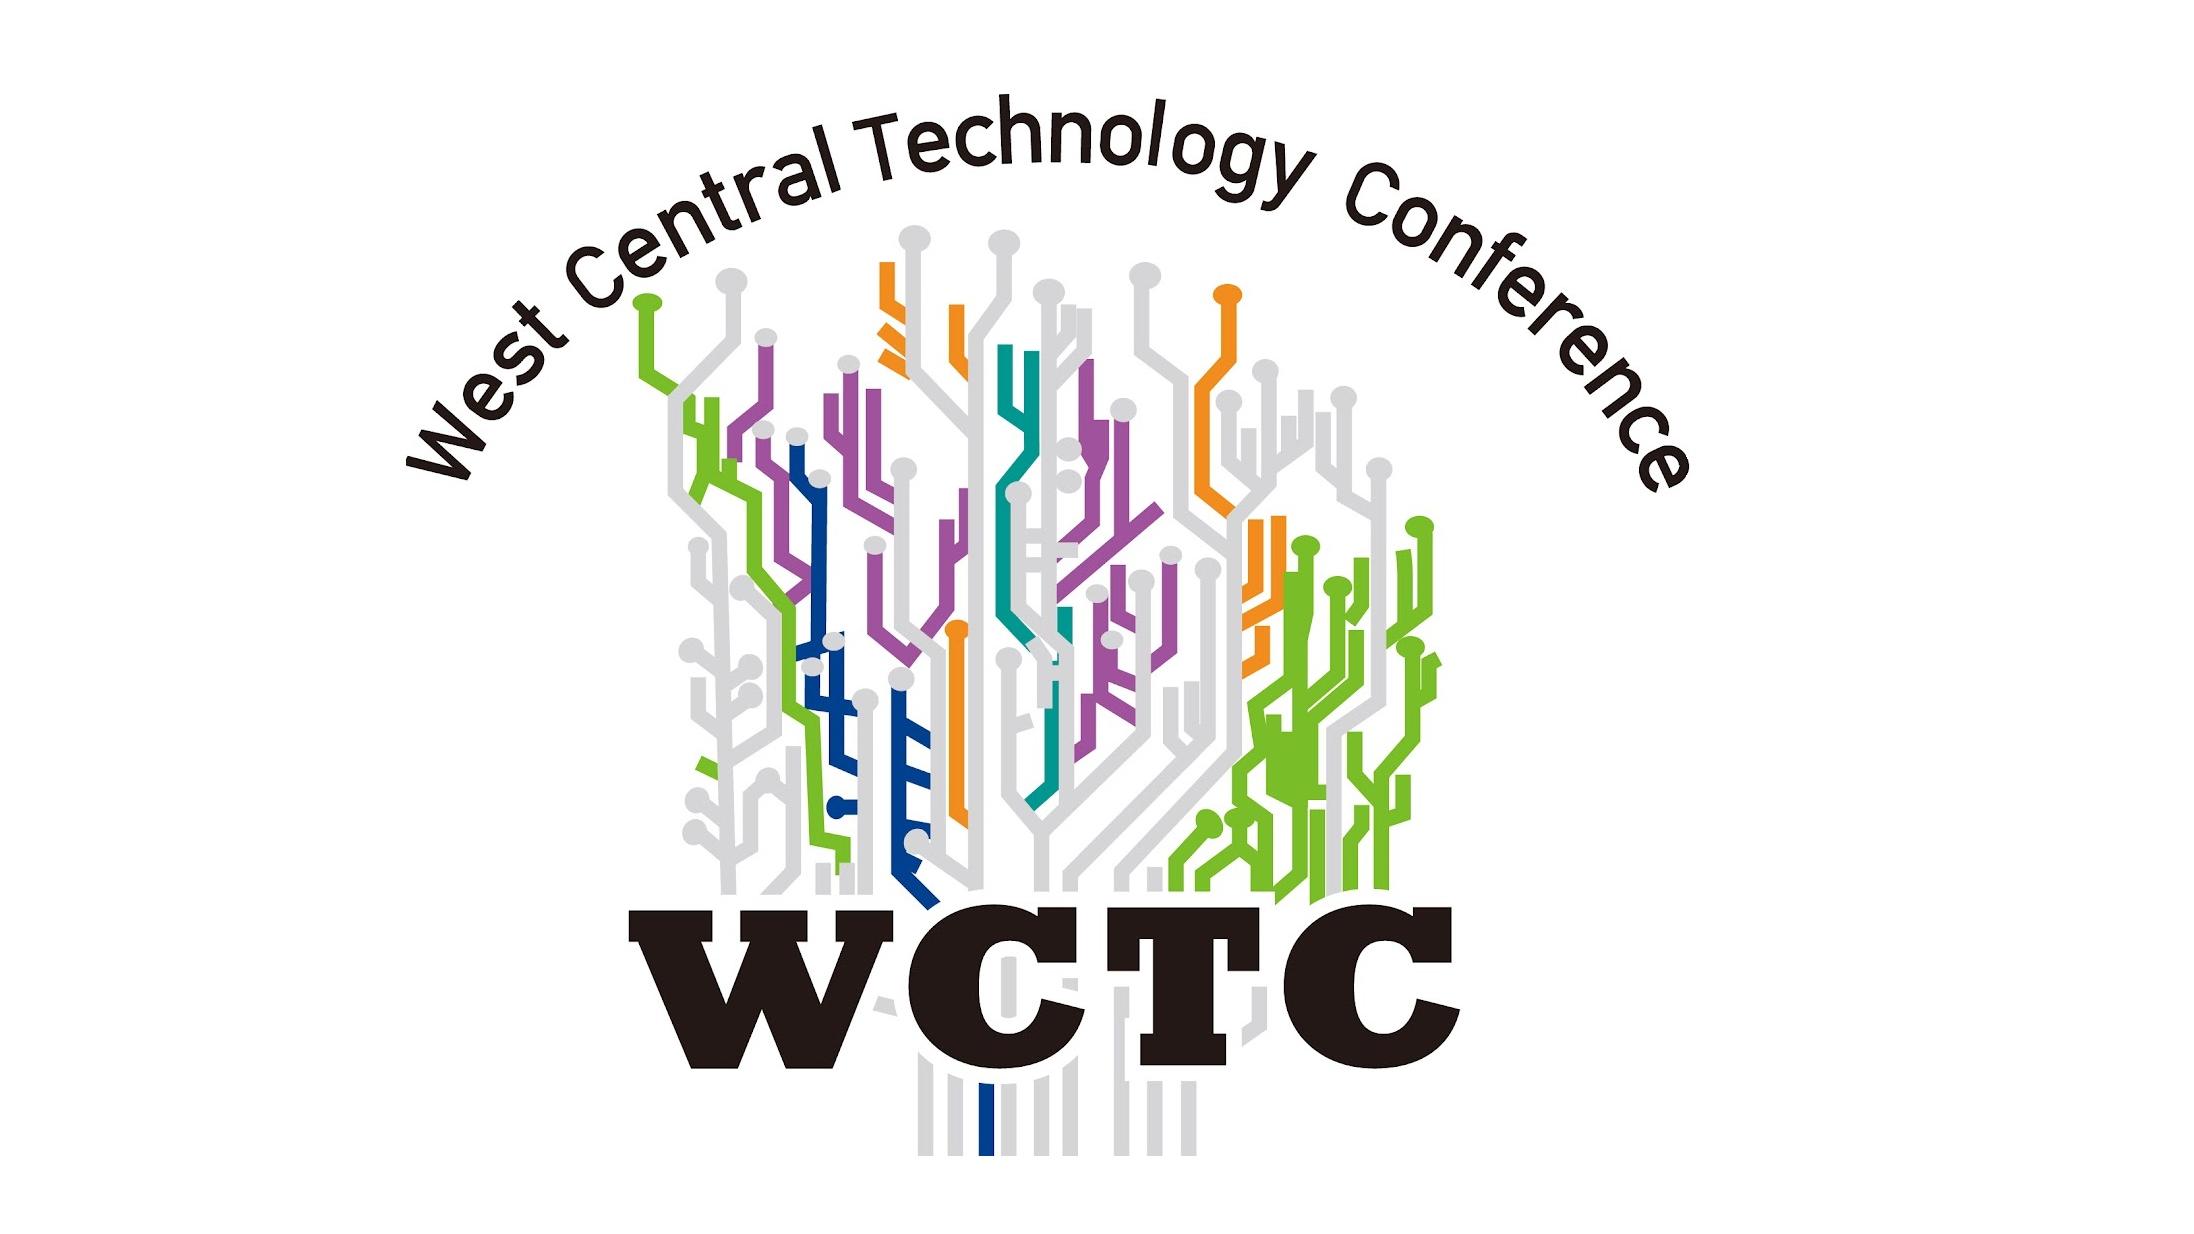 The West Central Technology Conference logo, meant to look like a circuit board.